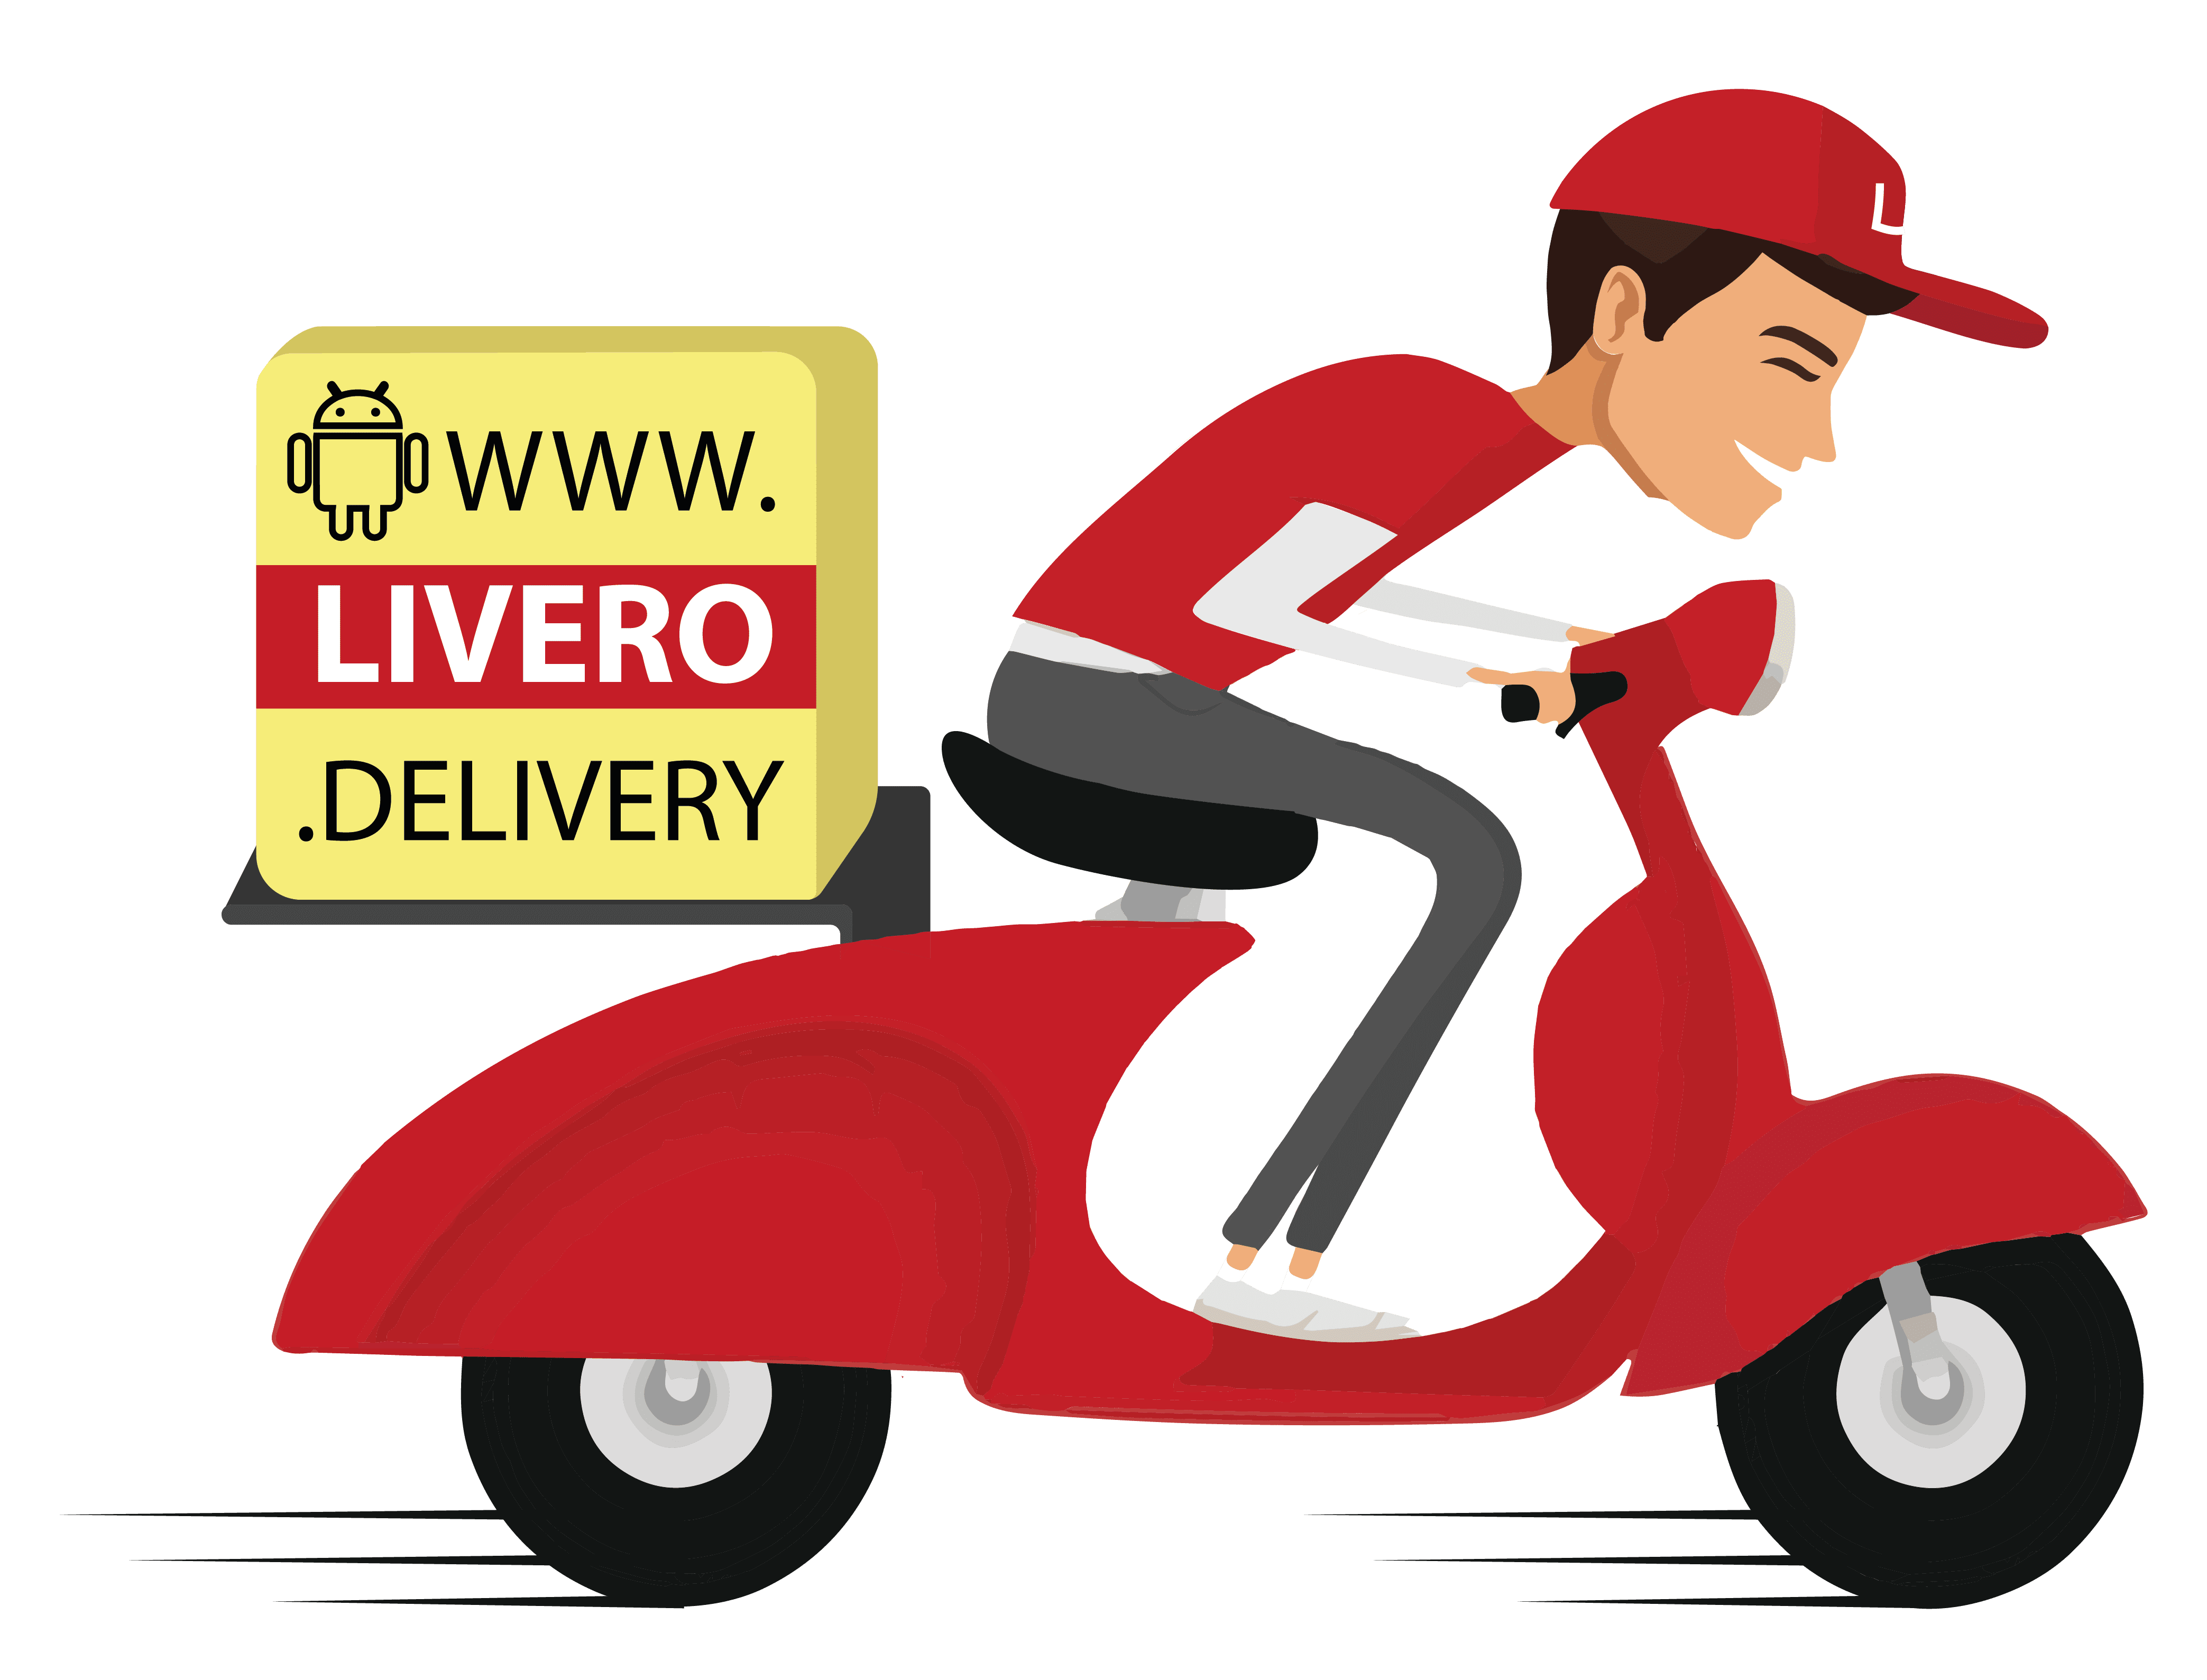 The delivery businesses, a million-dollar business in continuous growth